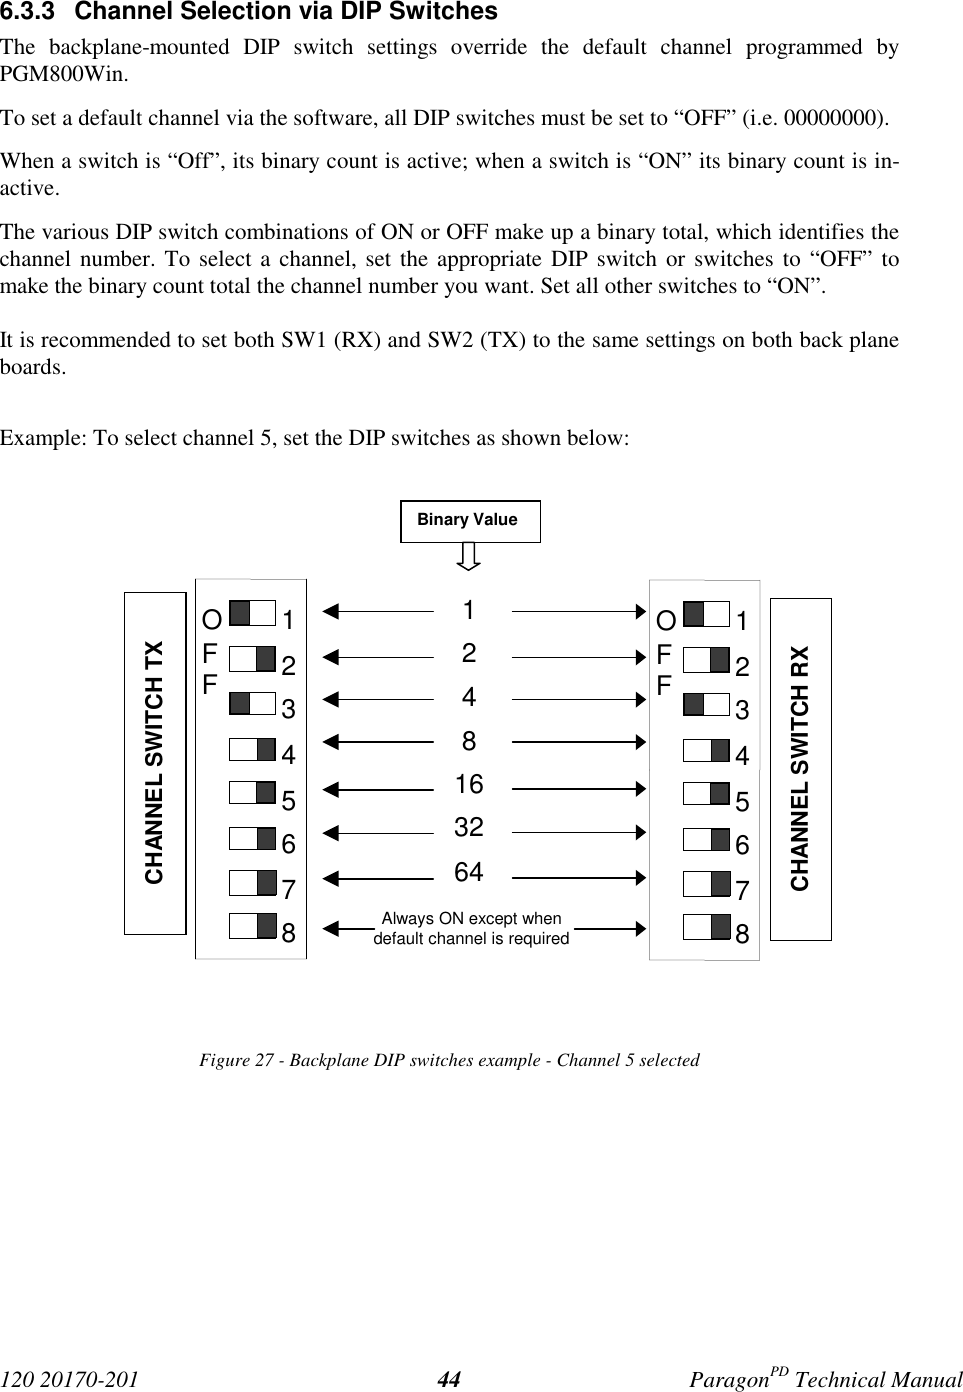 120 20170-201 ParagonPD Technical Manual446.3.3  Channel Selection via DIP SwitchesThe backplane-mounted DIP switch settings override the default channel programmed byPGM800Win.To set a default channel via the software, all DIP switches must be set to “OFF” (i.e. 00000000).When a switch is “Off”, its binary count is active; when a switch is “ON” its binary count is in-active.The various DIP switch combinations of ON or OFF make up a binary total, which identifies thechannel number. To select a channel, set the appropriate DIP switch or switches to “OFF” tomake the binary count total the channel number you want. Set all other switches to “ON”.It is recommended to set both SW1 (RX) and SW2 (TX) to the same settings on both back planeboards.Example: To select channel 5, set the DIP switches as shown below:Figure 27 - Backplane DIP switches example - Channel 5 selectedBinary Value1248163264Always ON except whendefault channel is requiredCHANNEL SWITCH TXCHANNEL SWITCH RX12345678OFF12345678OFF